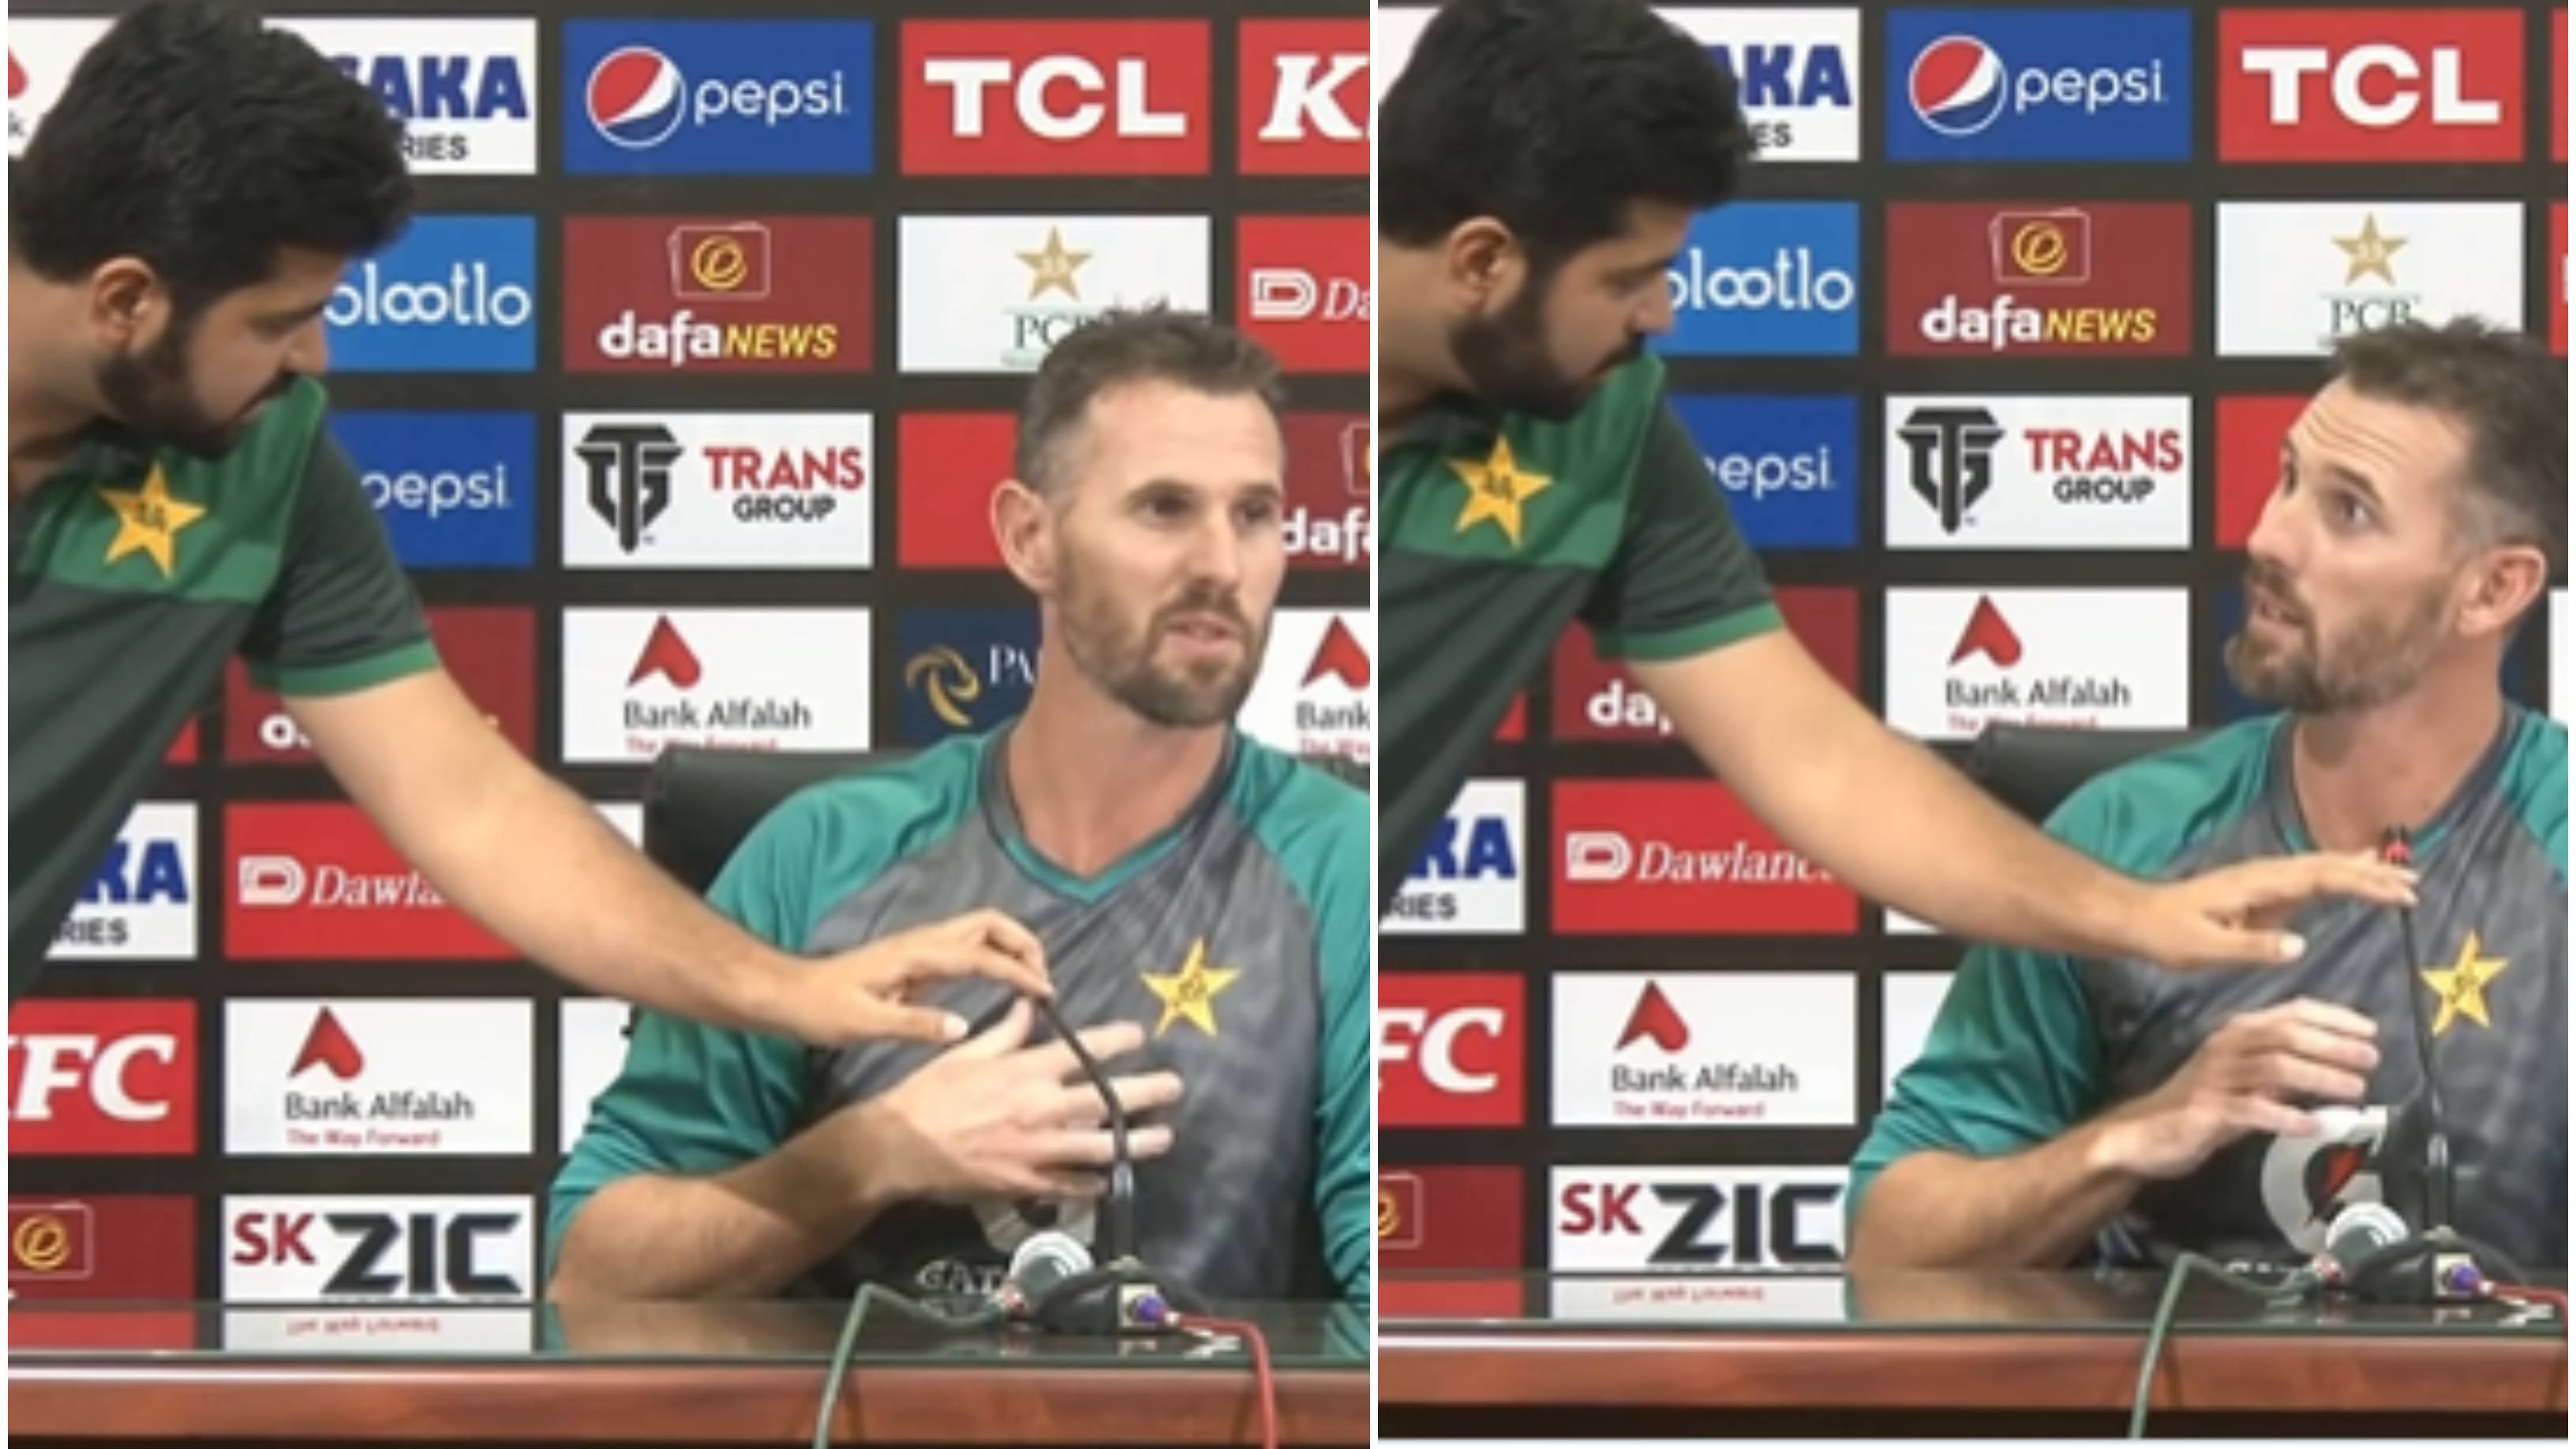 WATCH: Pakistan media coordinator intervenes after Shaun Tait’s “they send me when we lose badly” comment